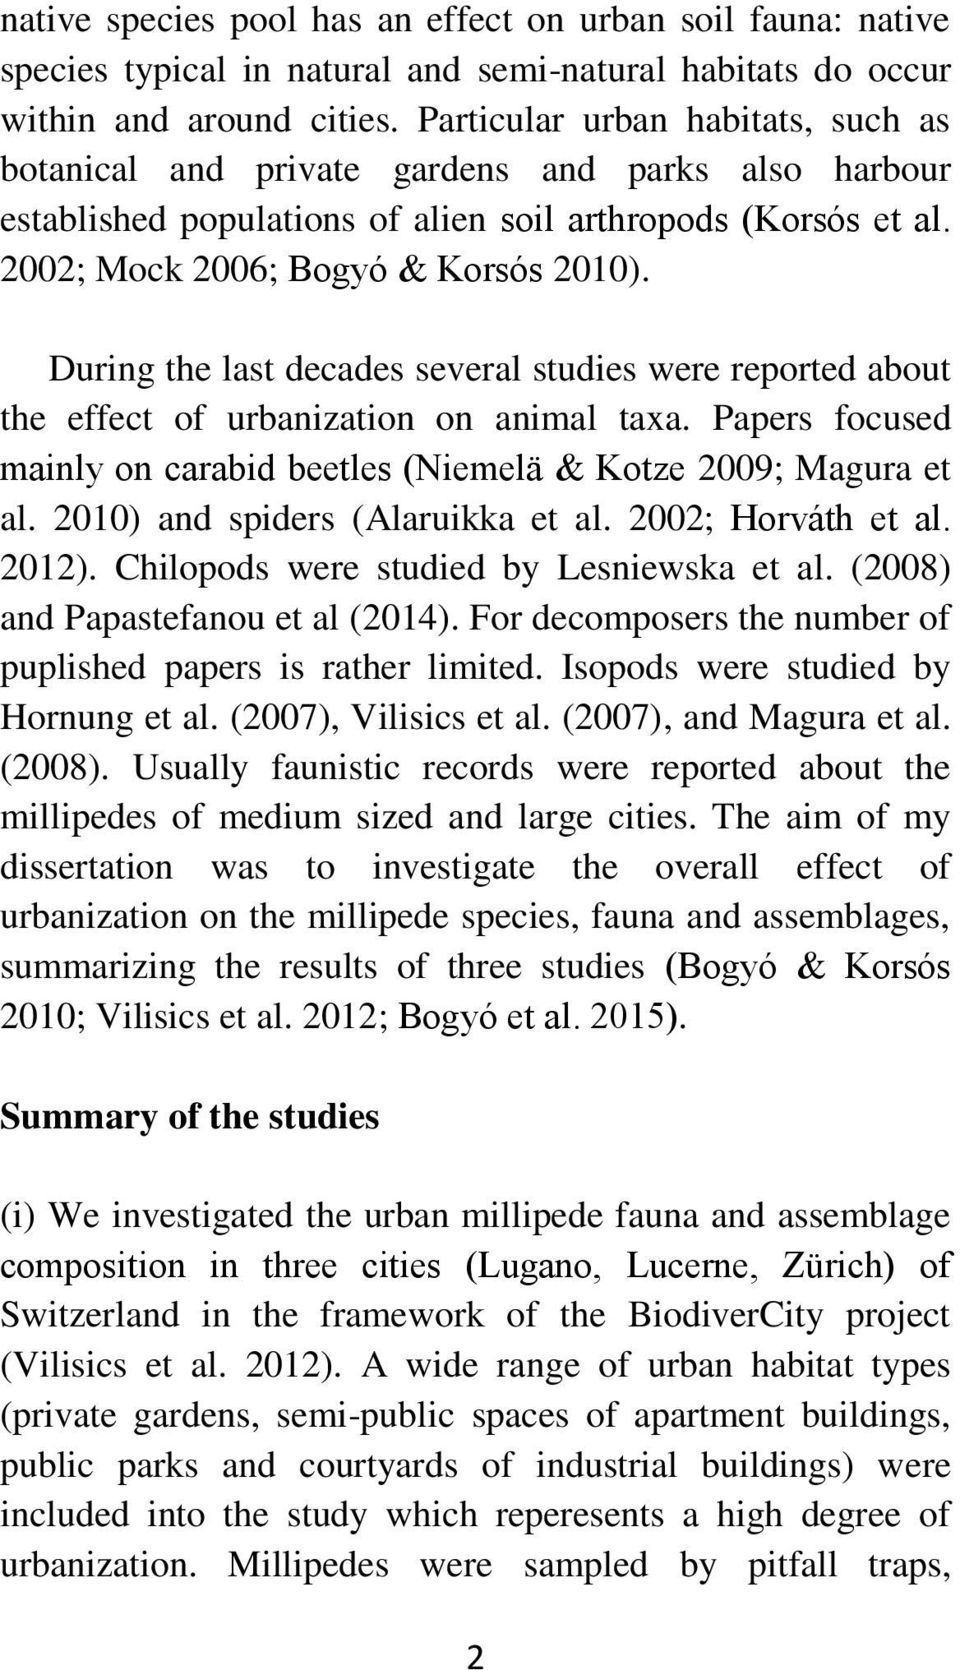 During the last decades several studies were reported about the effect of urbanization on animal taxa. Papers focused mainly on carabid beetles (Niemelä & Kotze 2009; Magura et al.